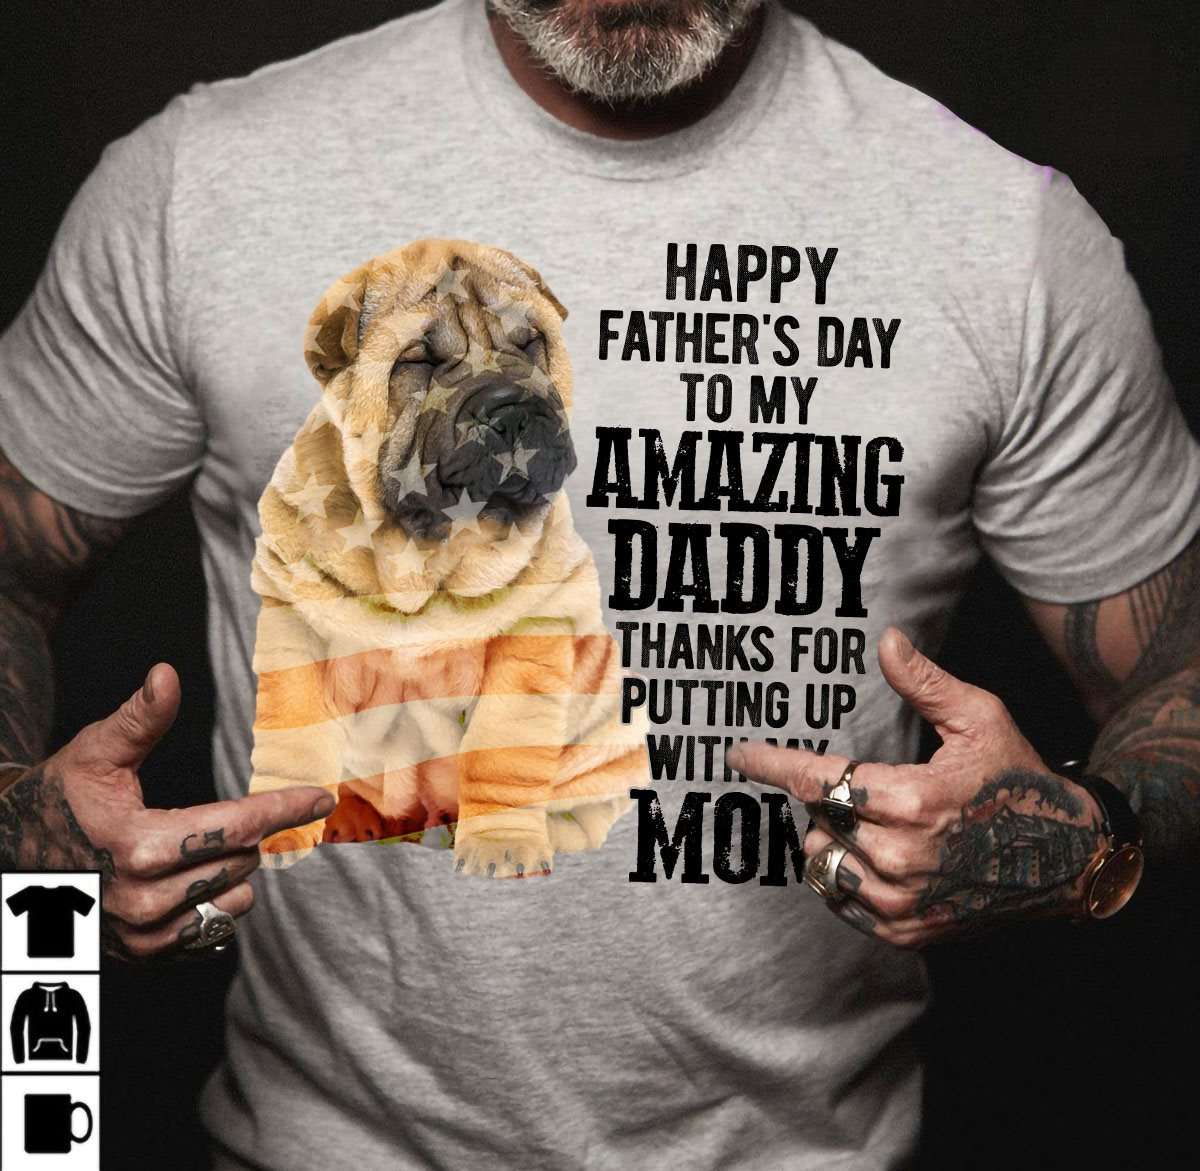 Shar Pei Dog - Happy father's day to amazing daddy thanks for putting up with my mom